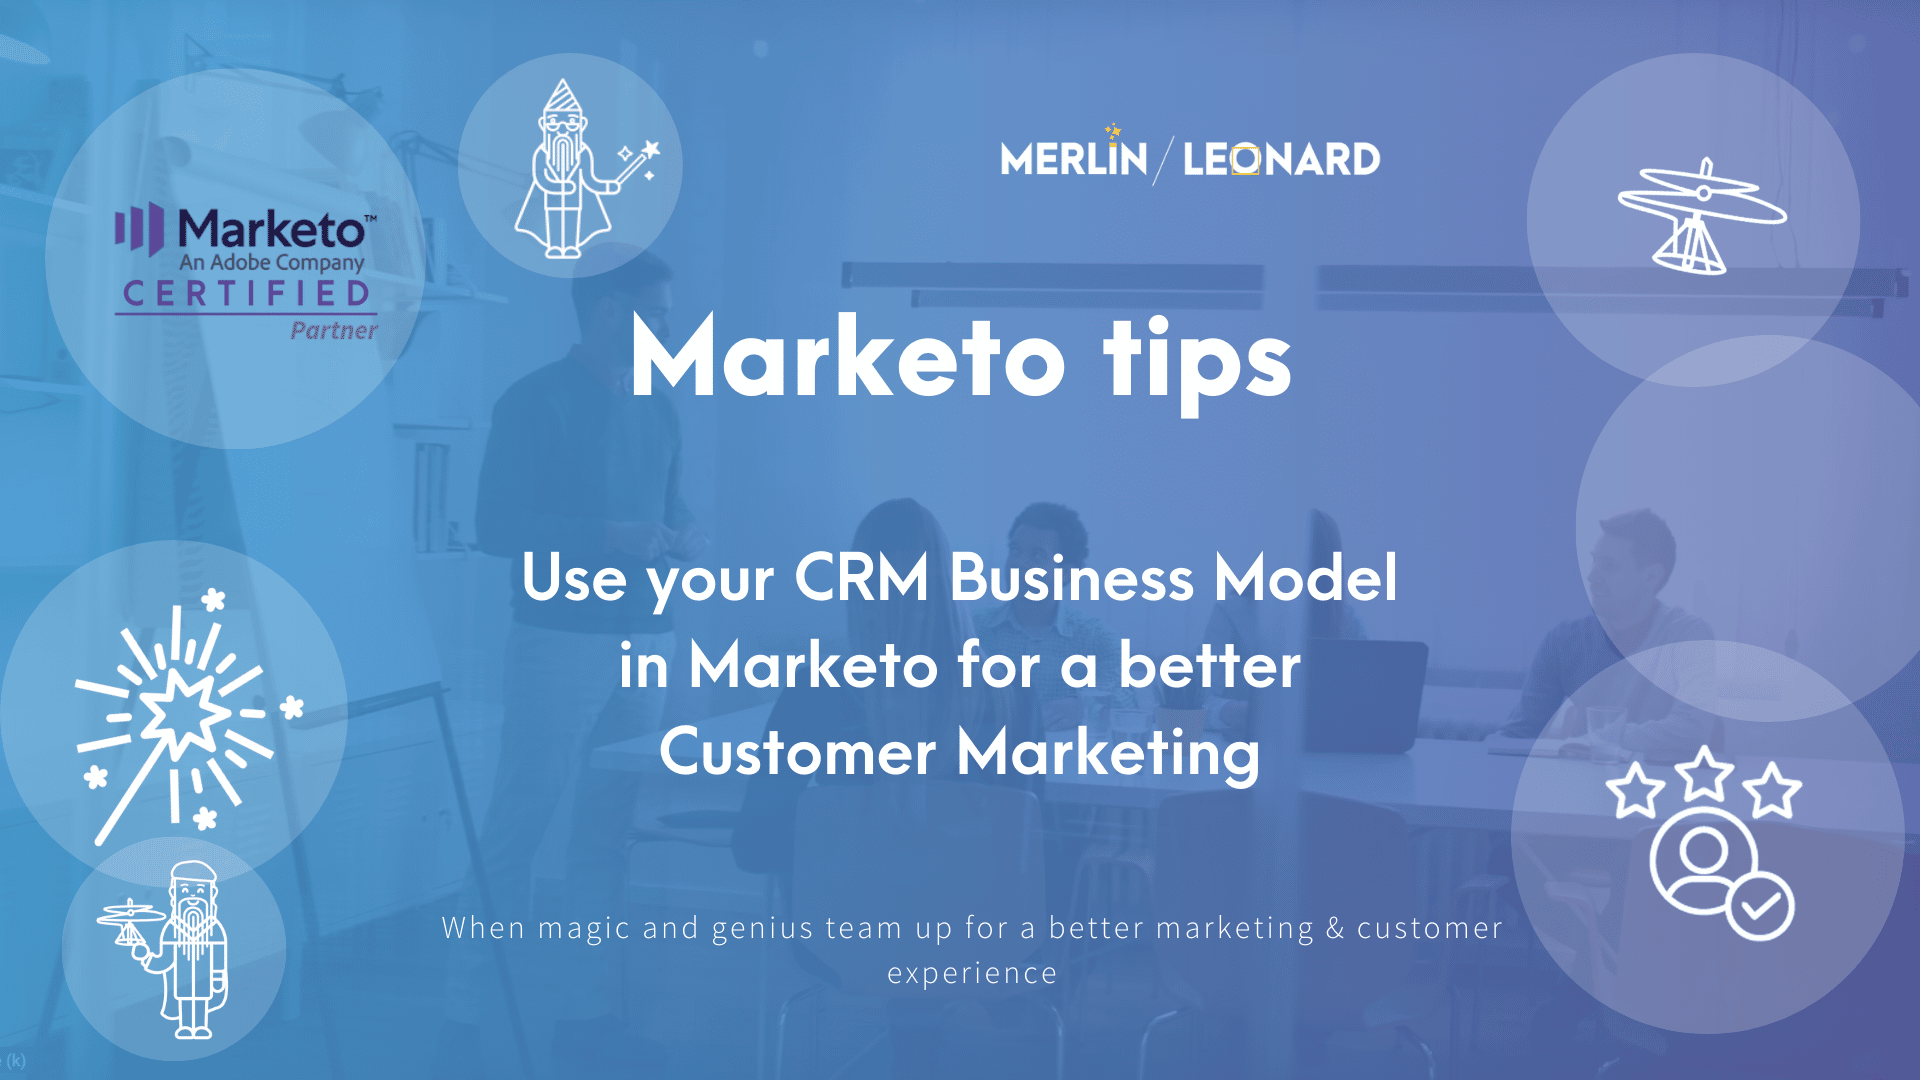 Use your CRM Busines Model in Marketo for a better Customer Marketing